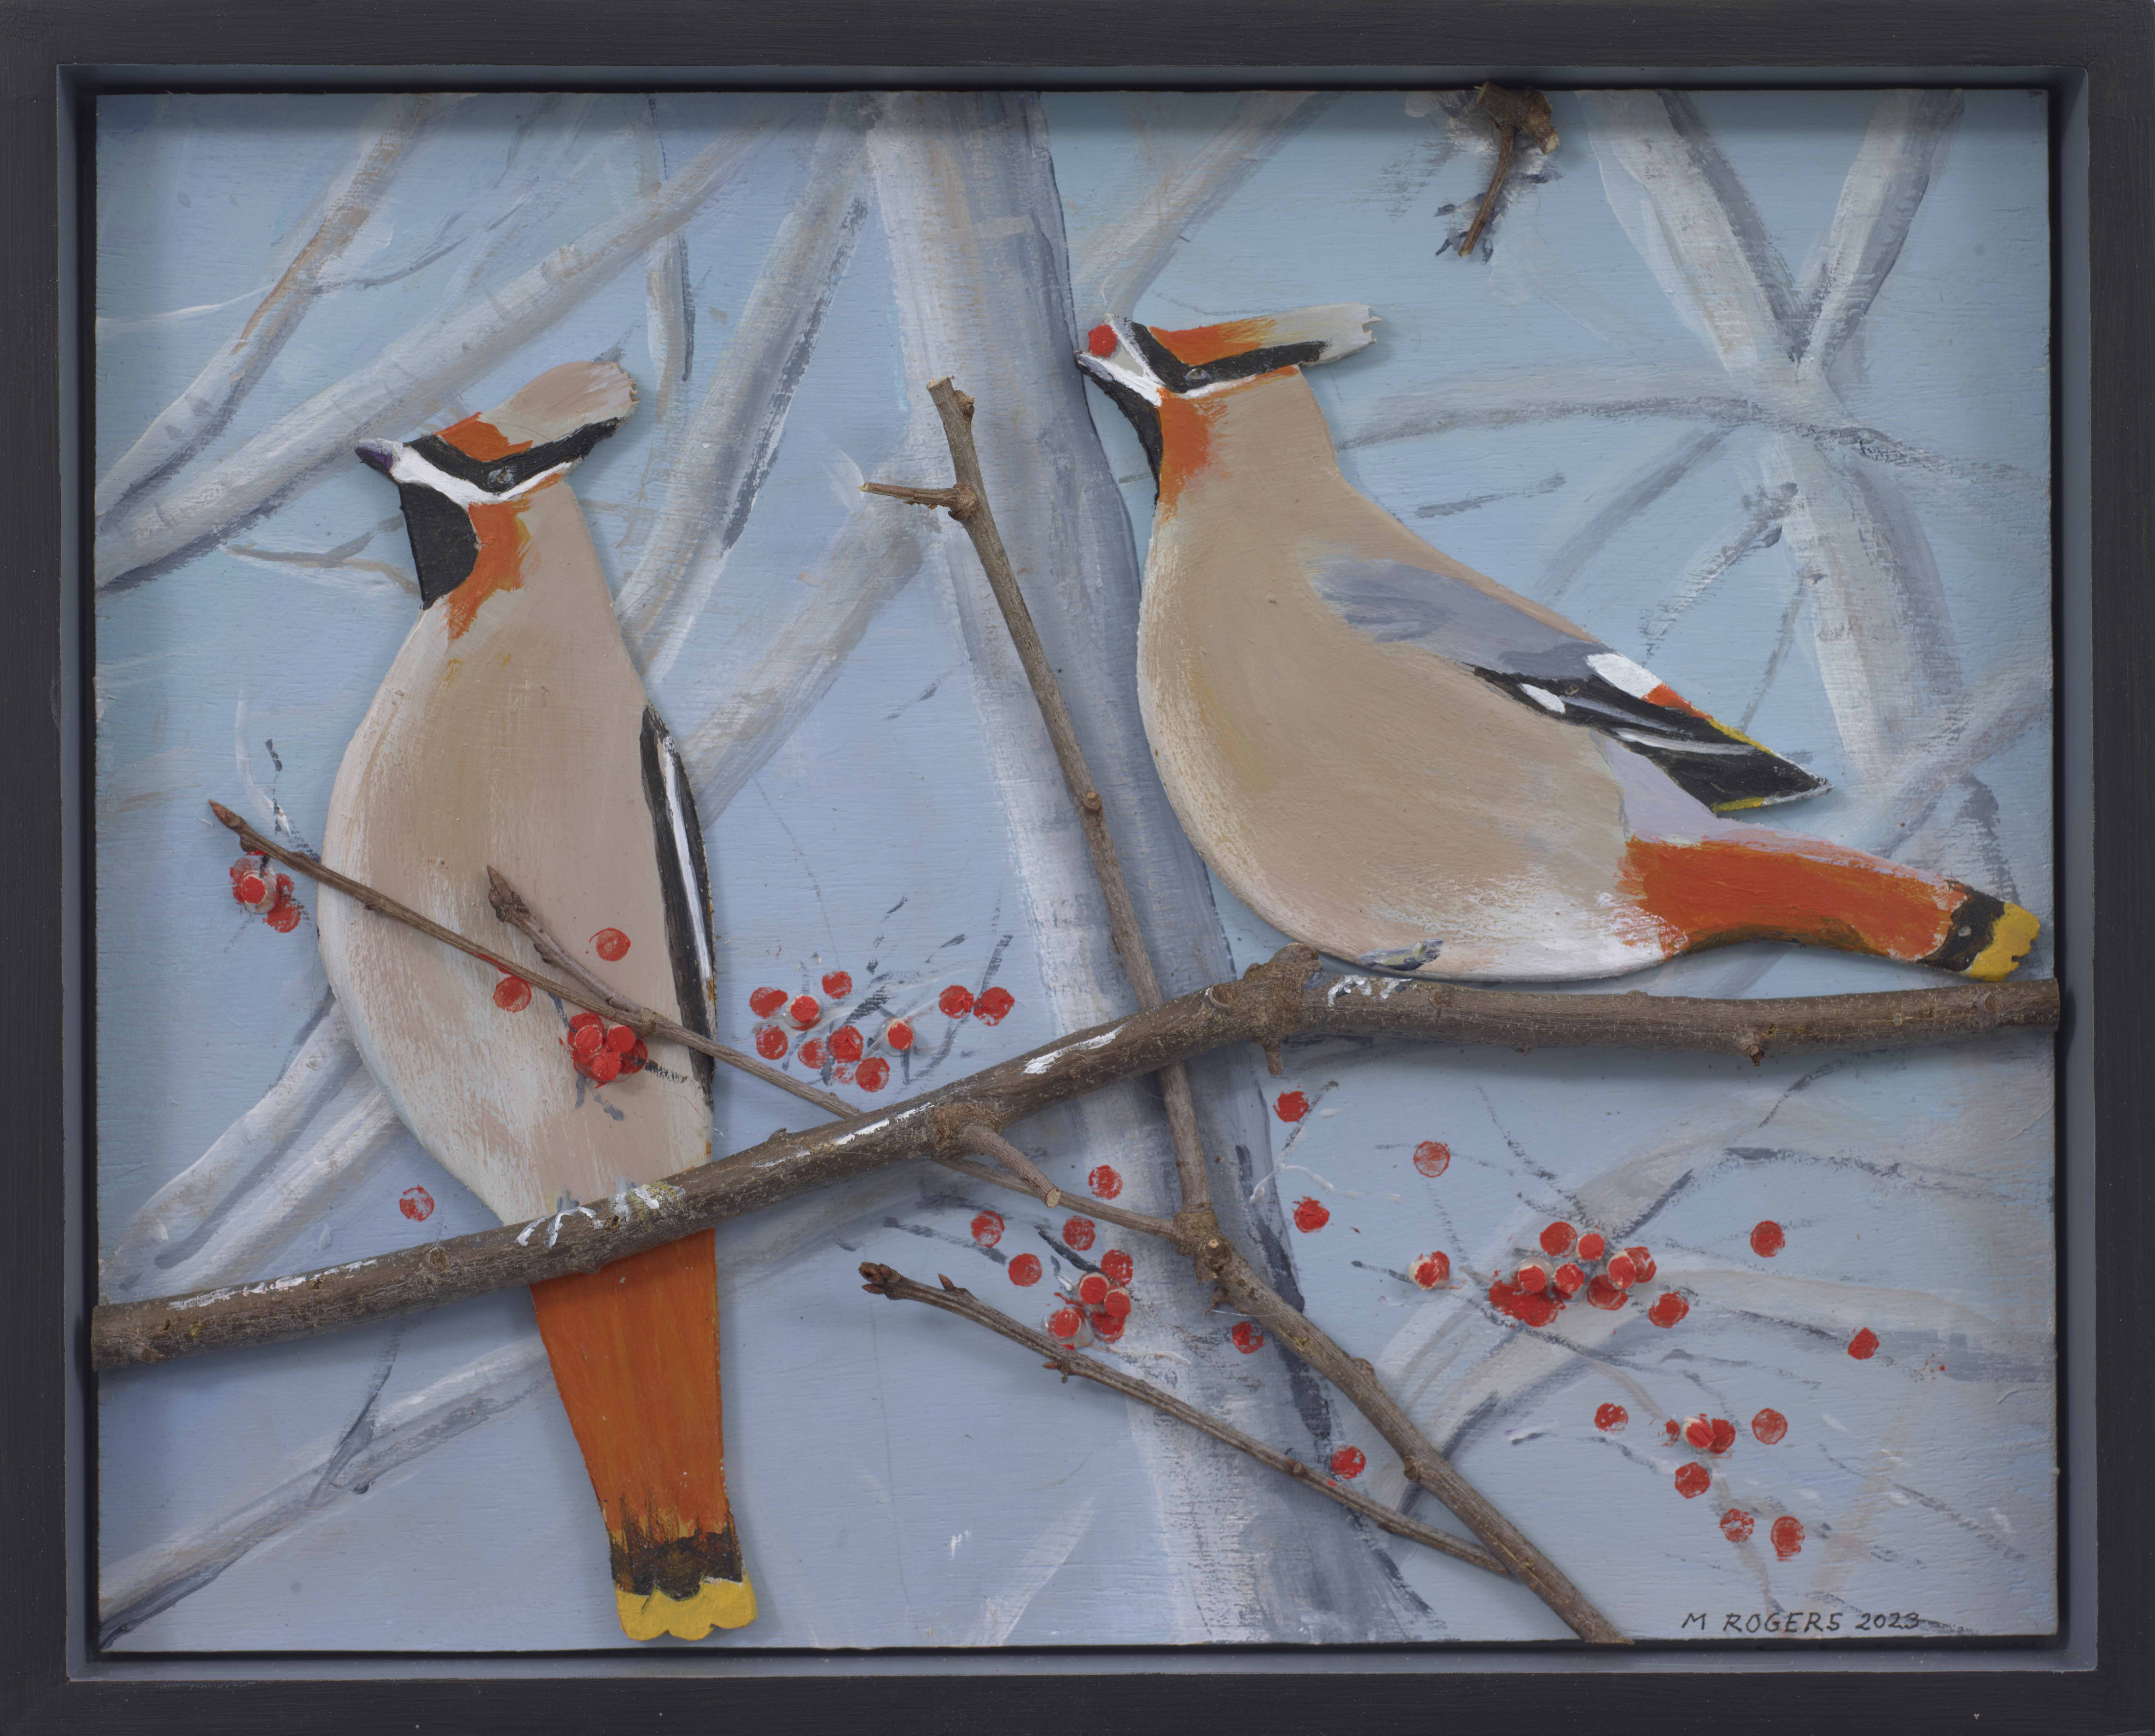 Waxwings & Berries, 2023, mixed media, 12.75 x 15.75 inches